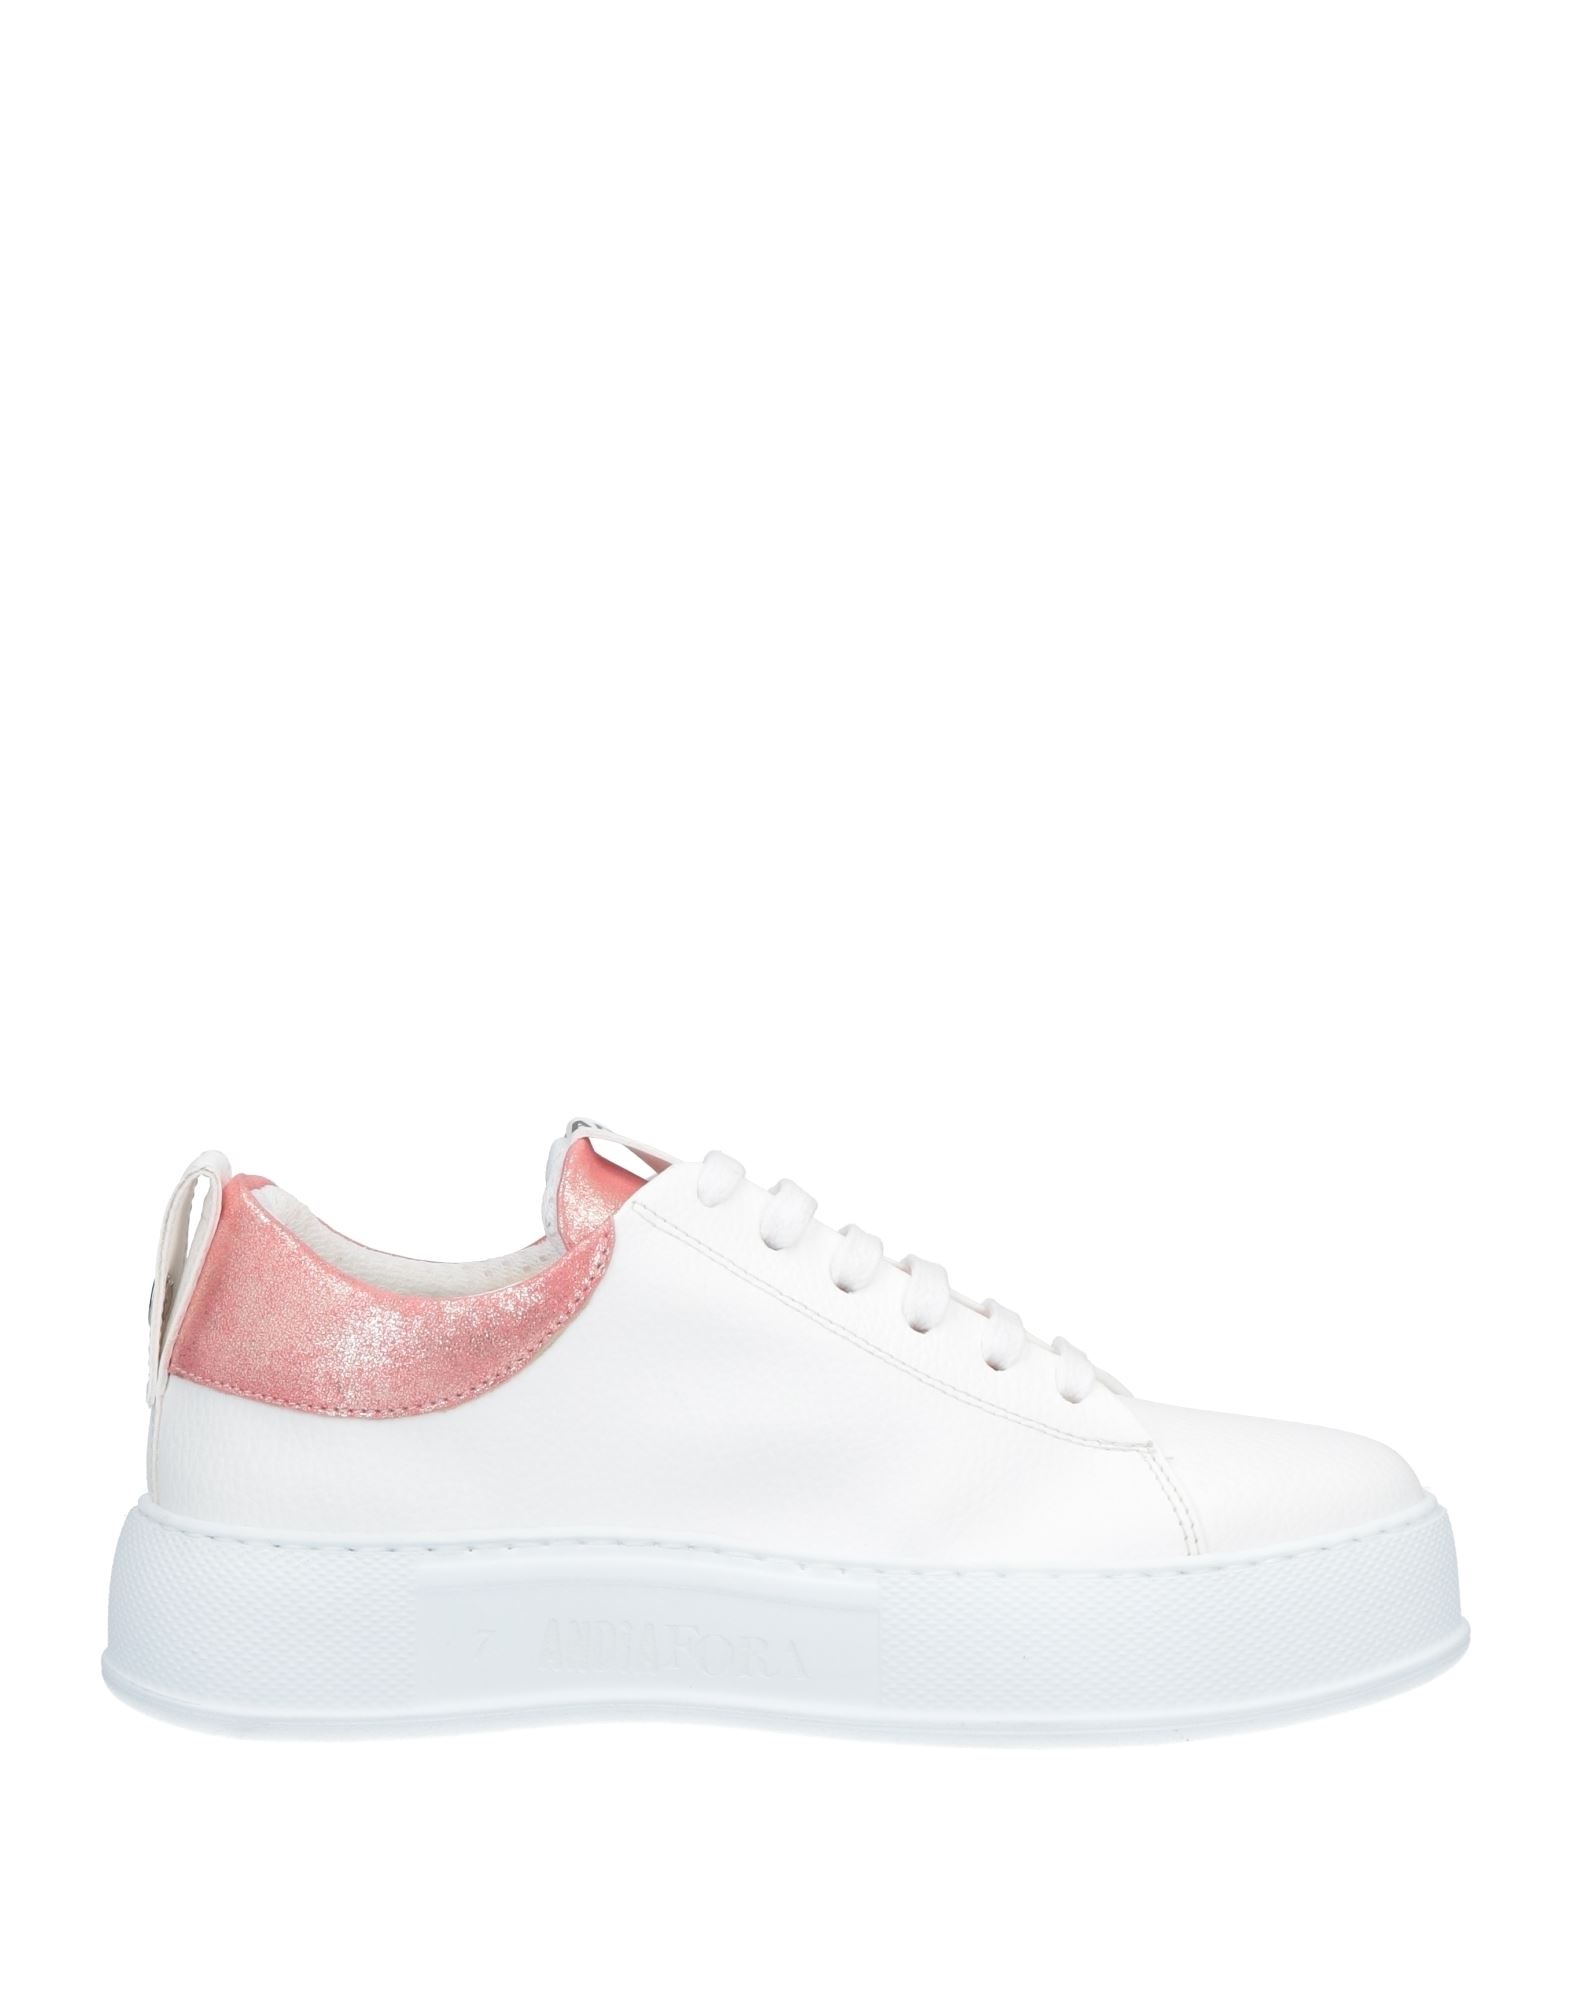 Andìa Fora Woman Sneakers White Size 6 Soft Leather